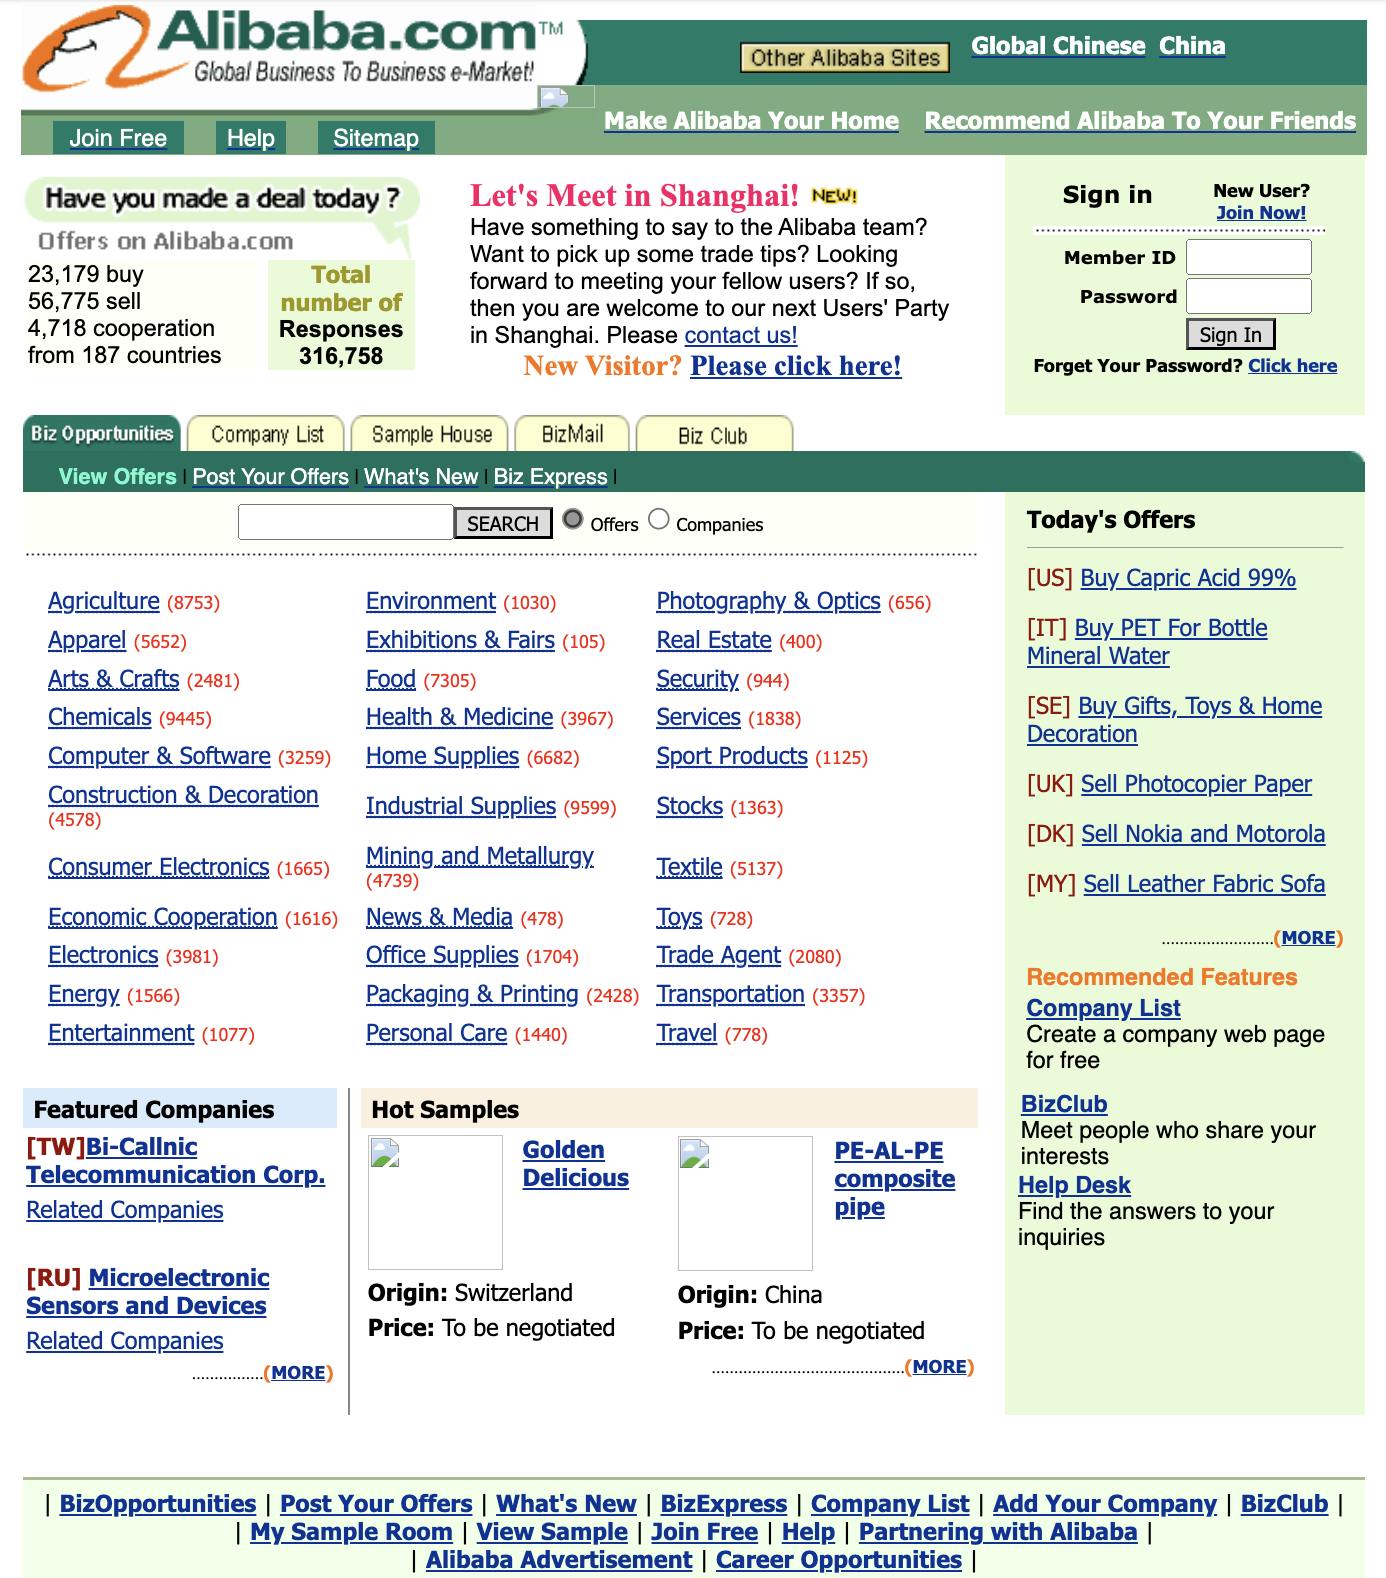 Screenshot of Alibaba.com in 2020. The site use three green hues for emphasis but is otherwise quite unstylized, with product categories listed in simple text with blue color and underscore. Some featured companies are highlighted as text links in the bottom left corner of the site.